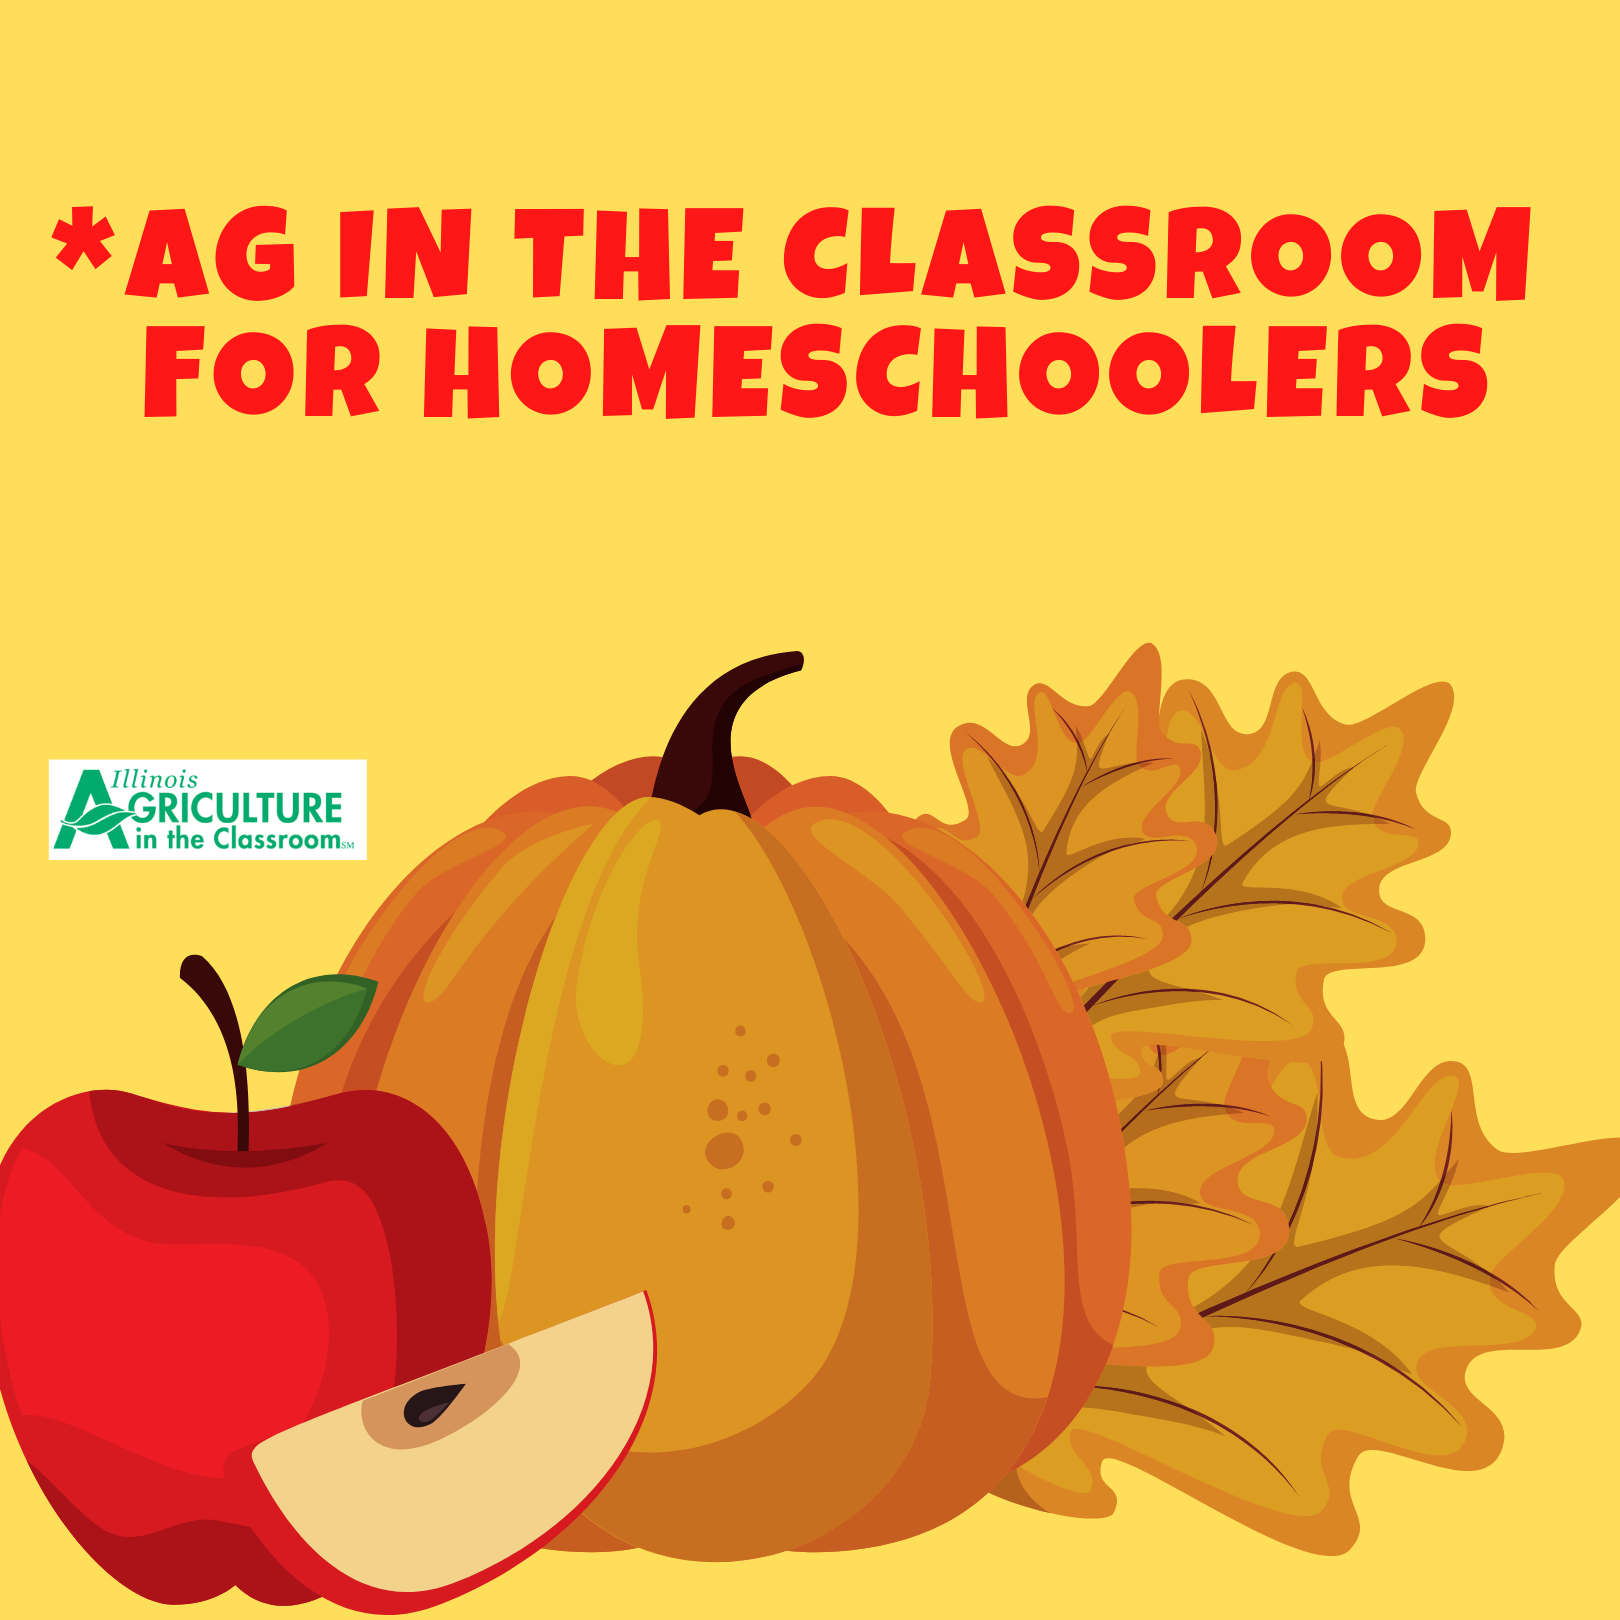 *Ag in the classroom apples and pumpkins